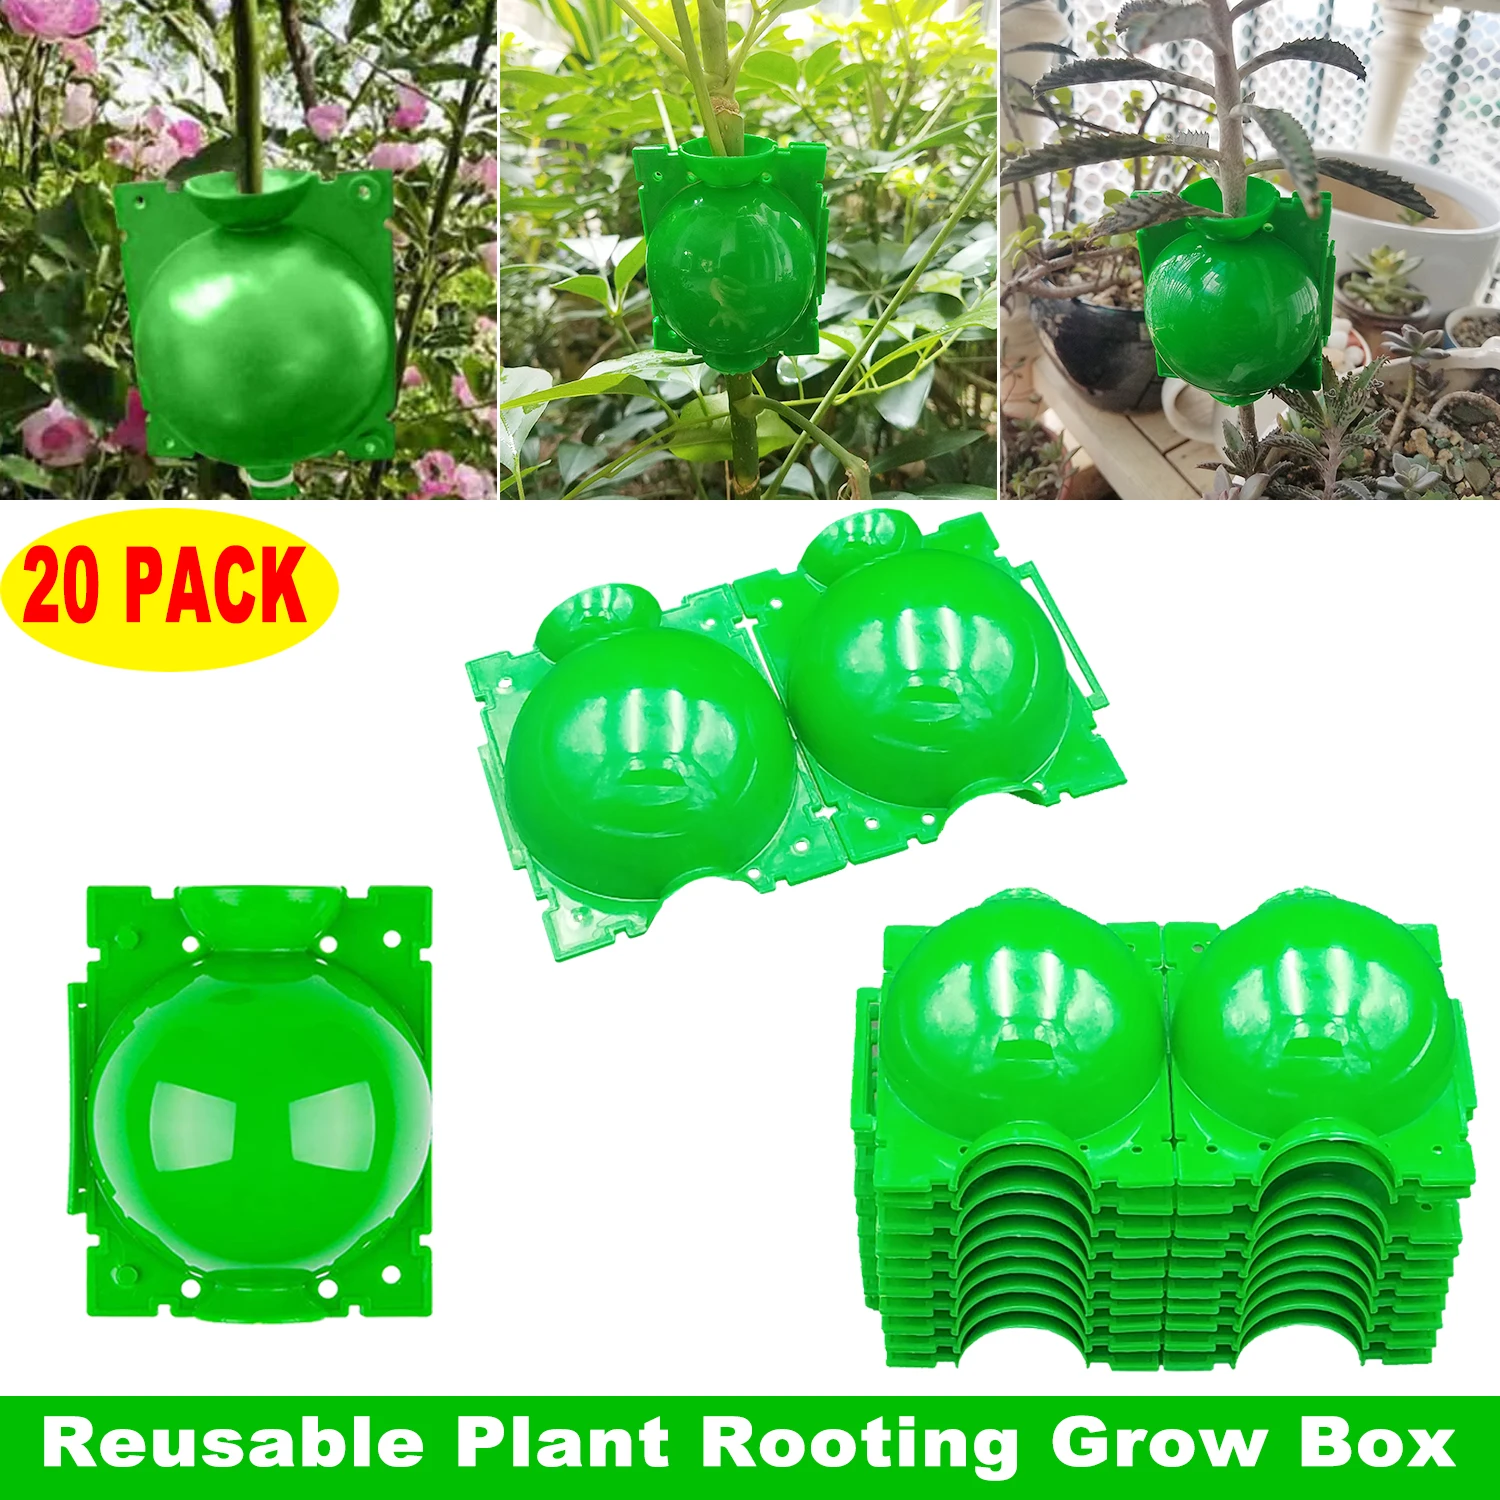 20pcs Plant Root Ball Reusable Grafting Rooting Growing Box Green Plant Root Device High Pressure Layering Pod Balls for Plant